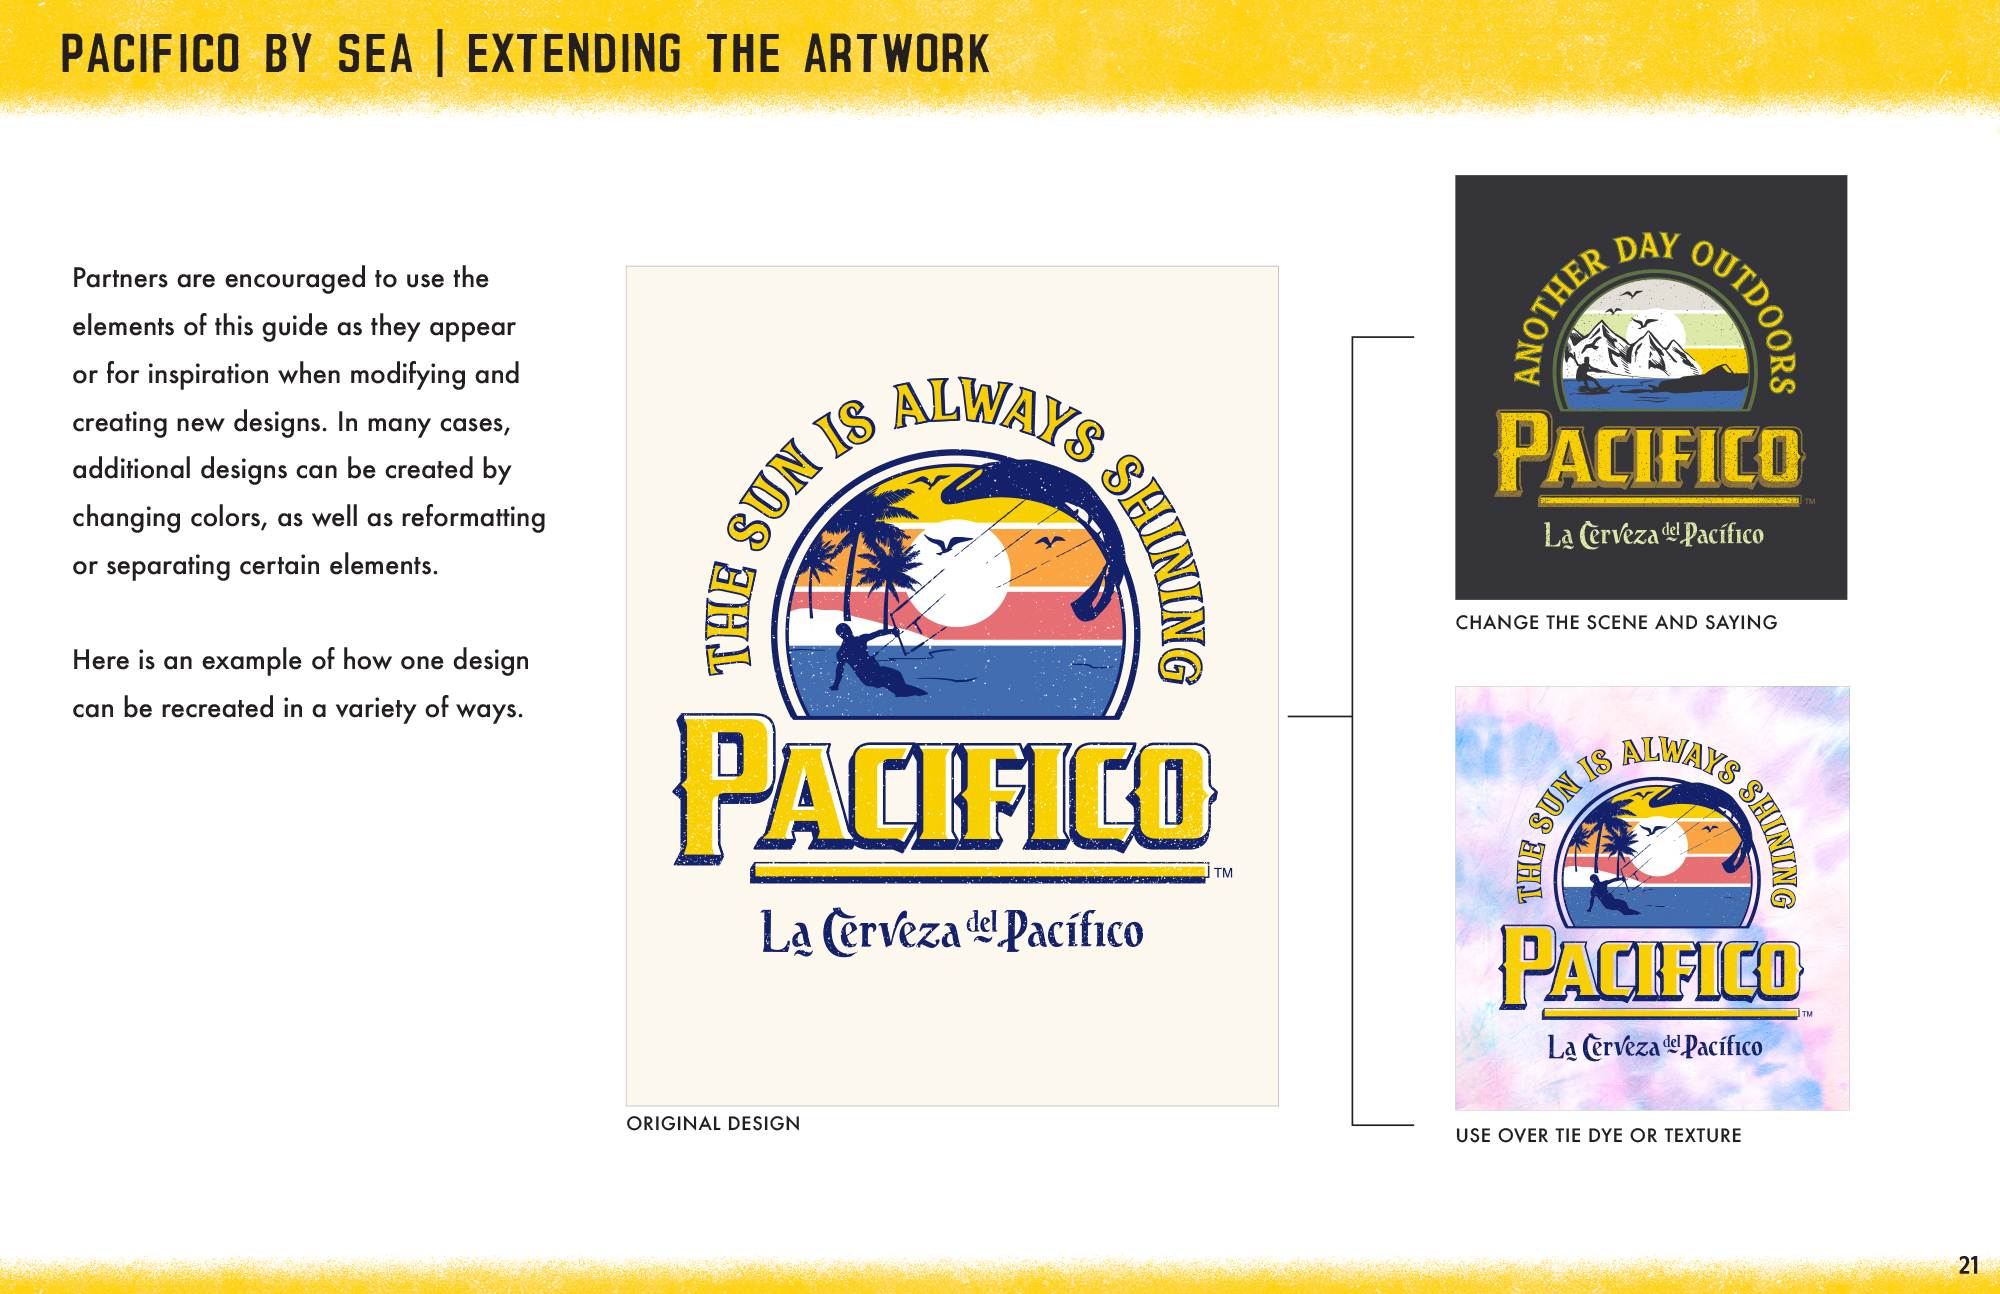 Pacifico Brand Designs and Product Vision Extending the Artwork